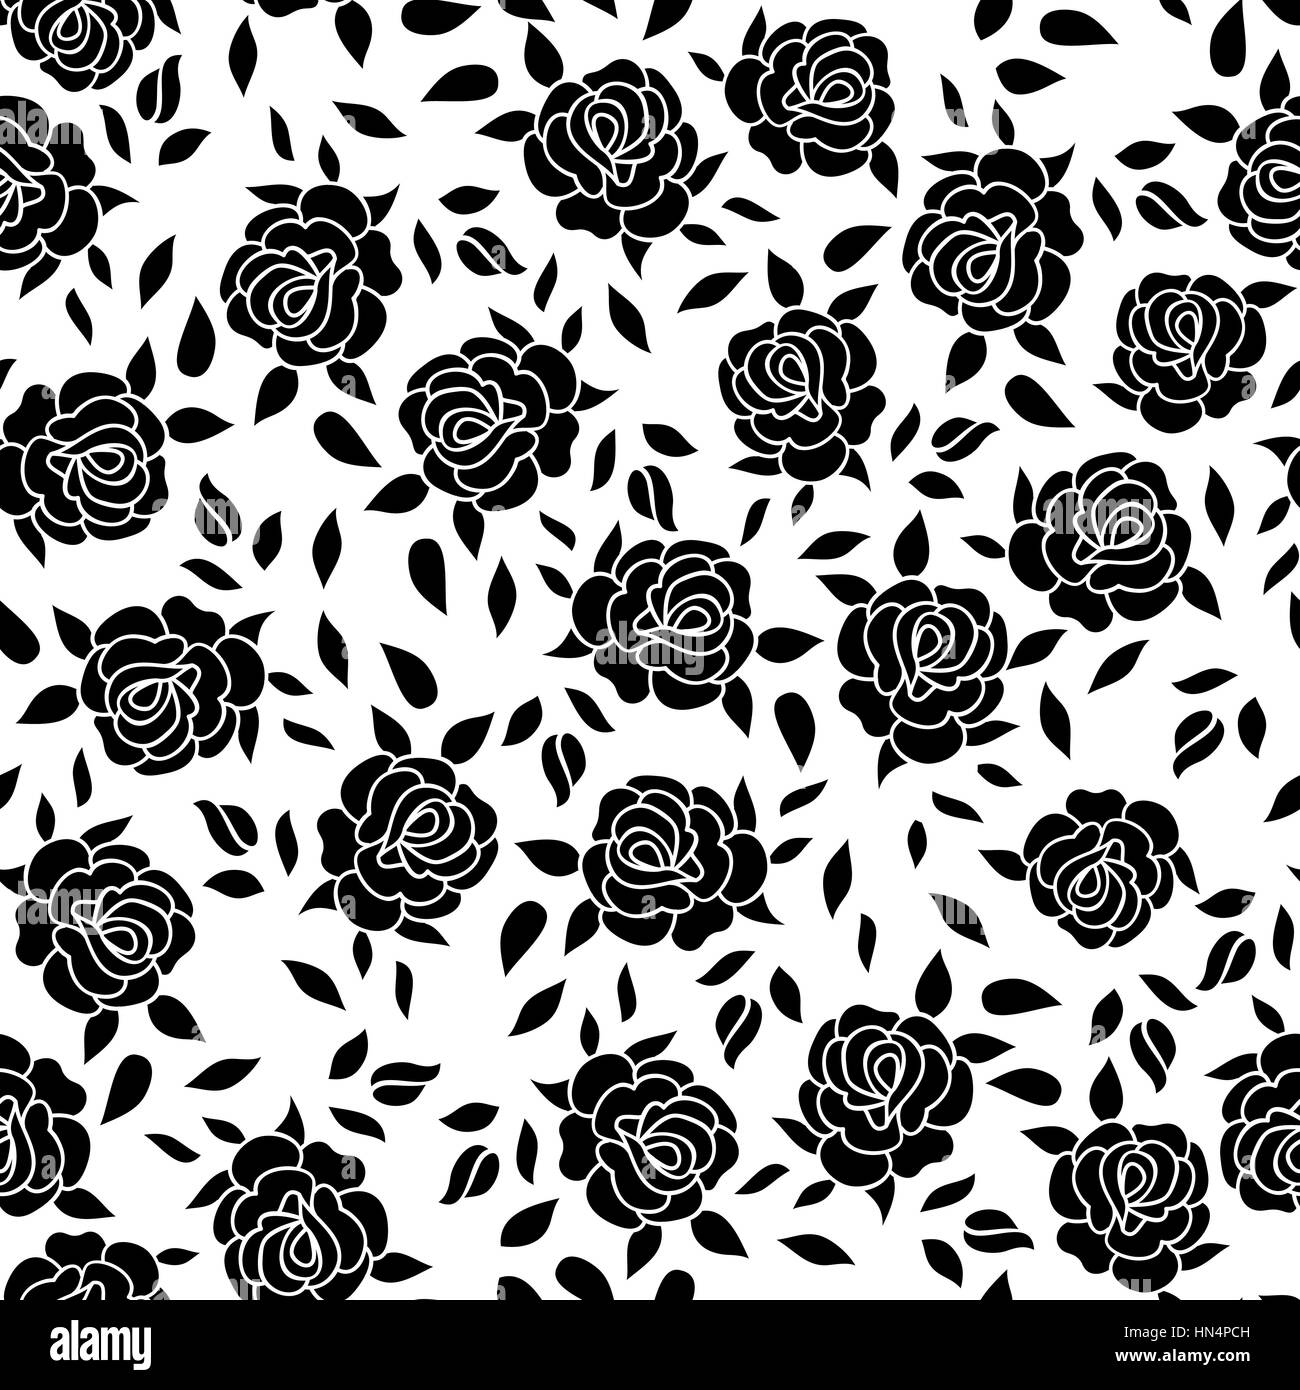 Floral pattern Black and White Stock Photos & Images - Alamy